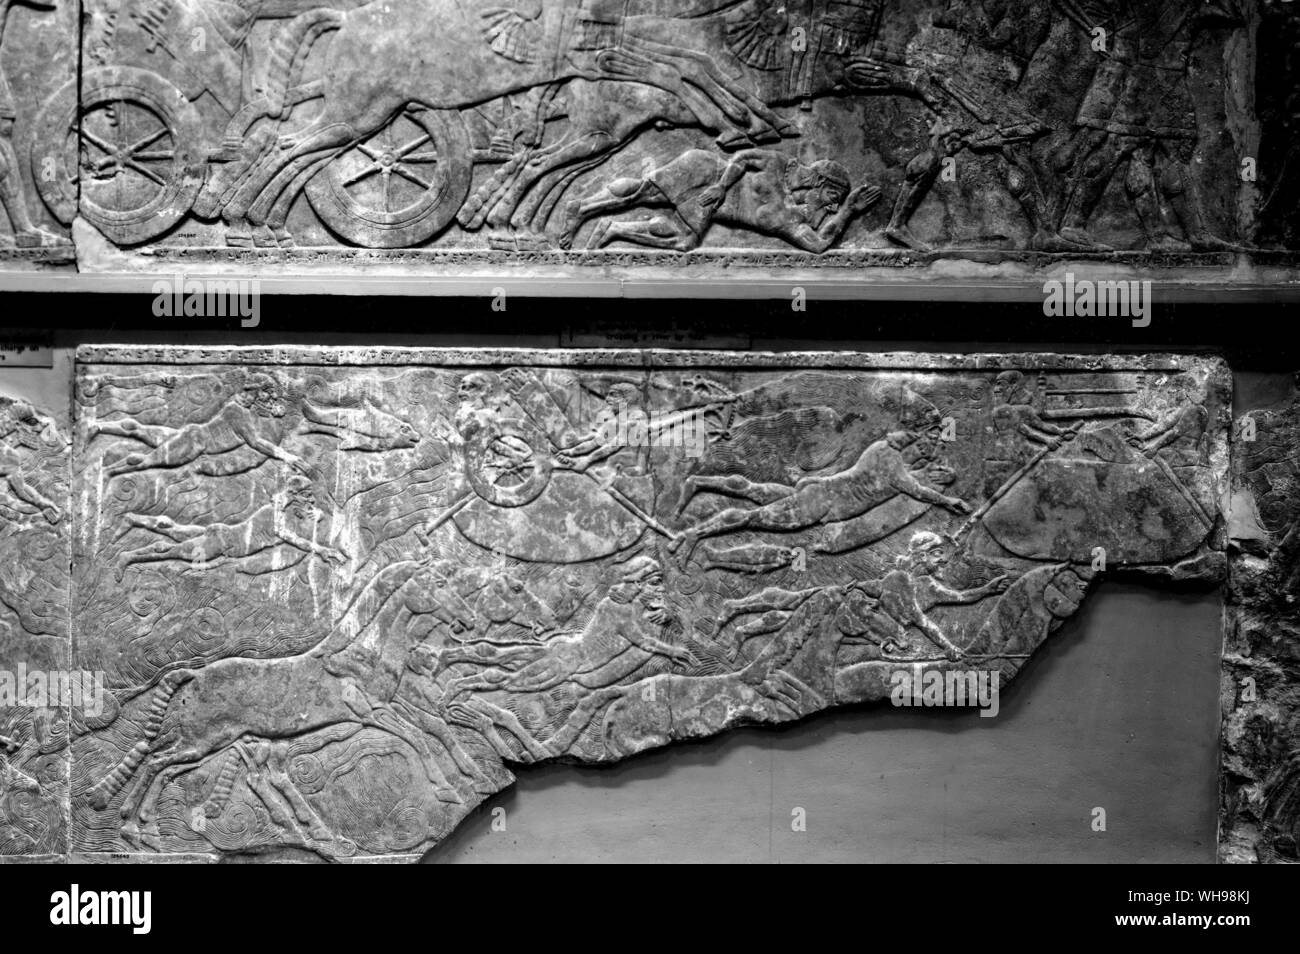 Warfare/ Fording a river with dismantled chariots. relief from Ashurnasirpal II's palace. 883-859 B.C. Stock Photo